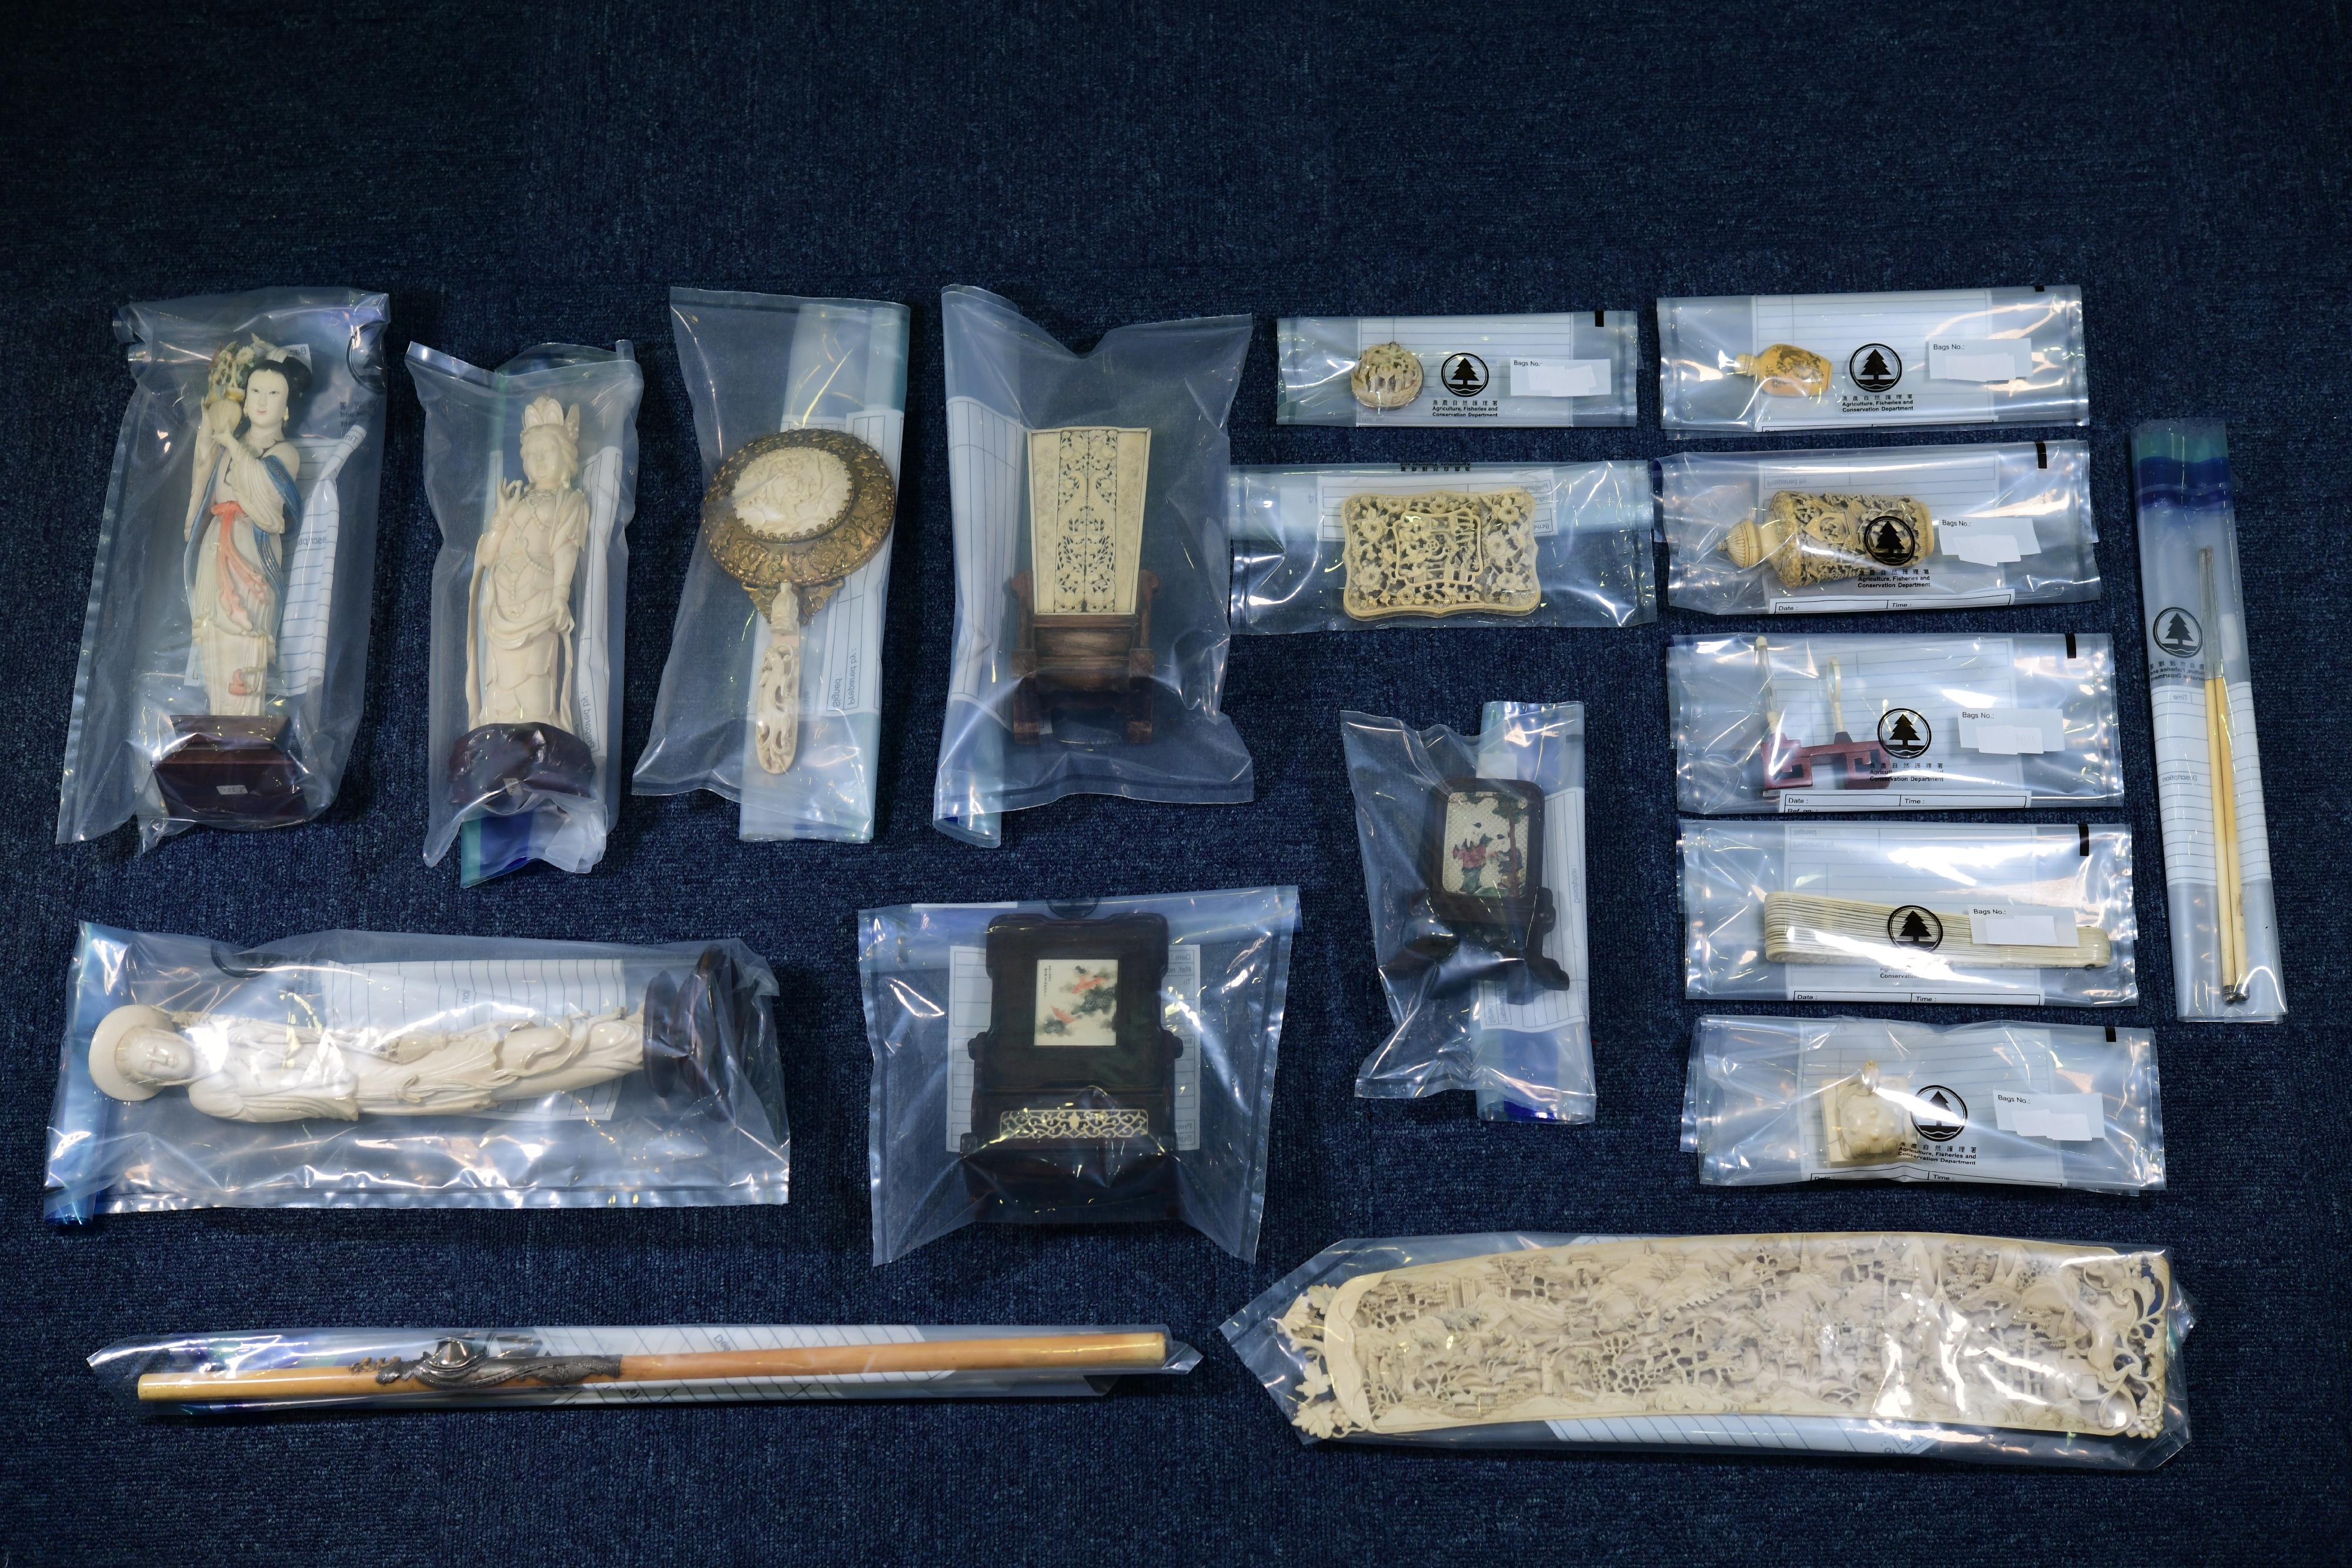 AFCD seizes 17 pieces of suspected ivory products (with photo)